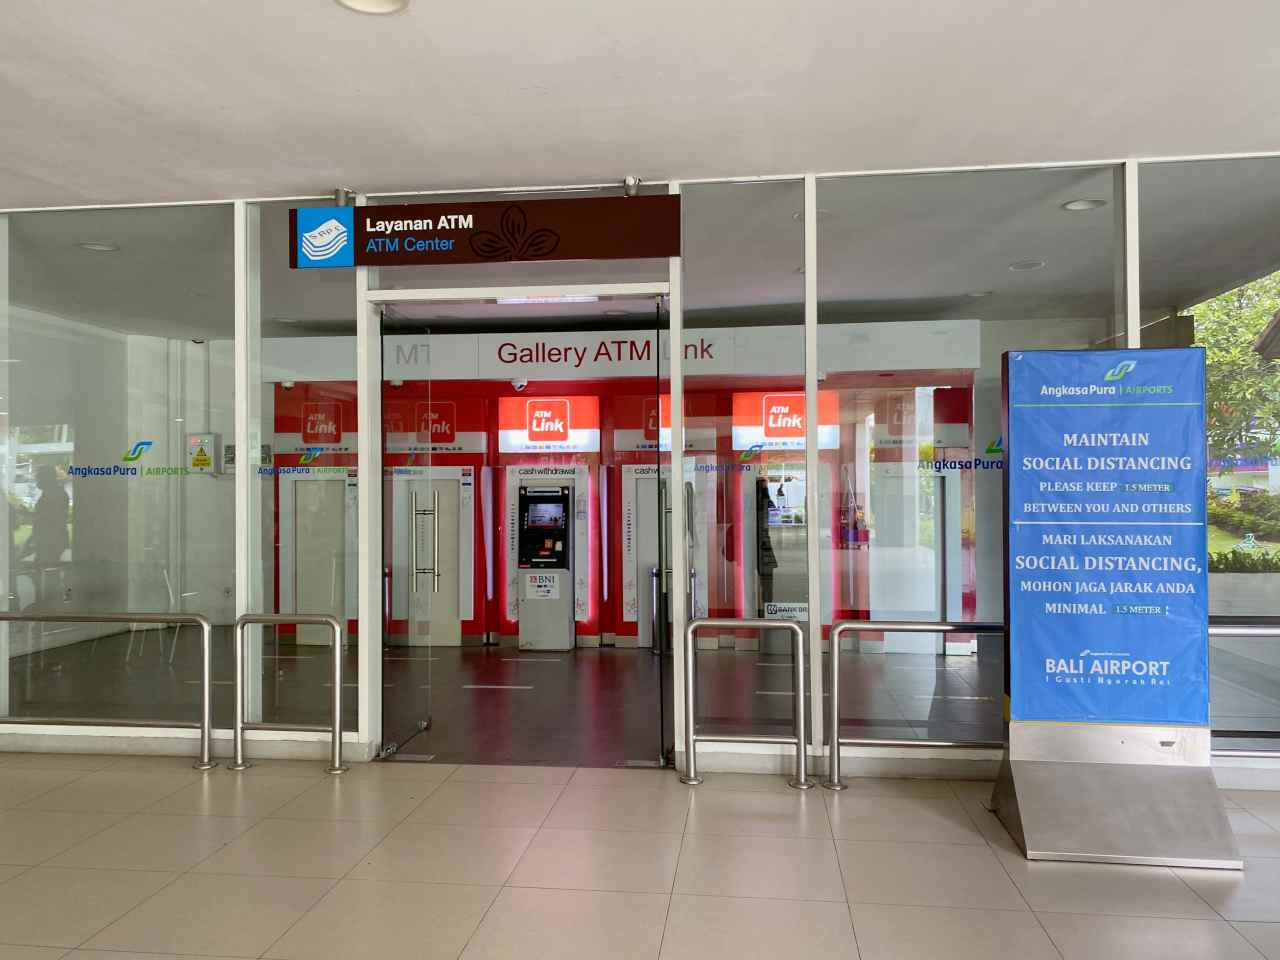 ATM machines in bali airport. 